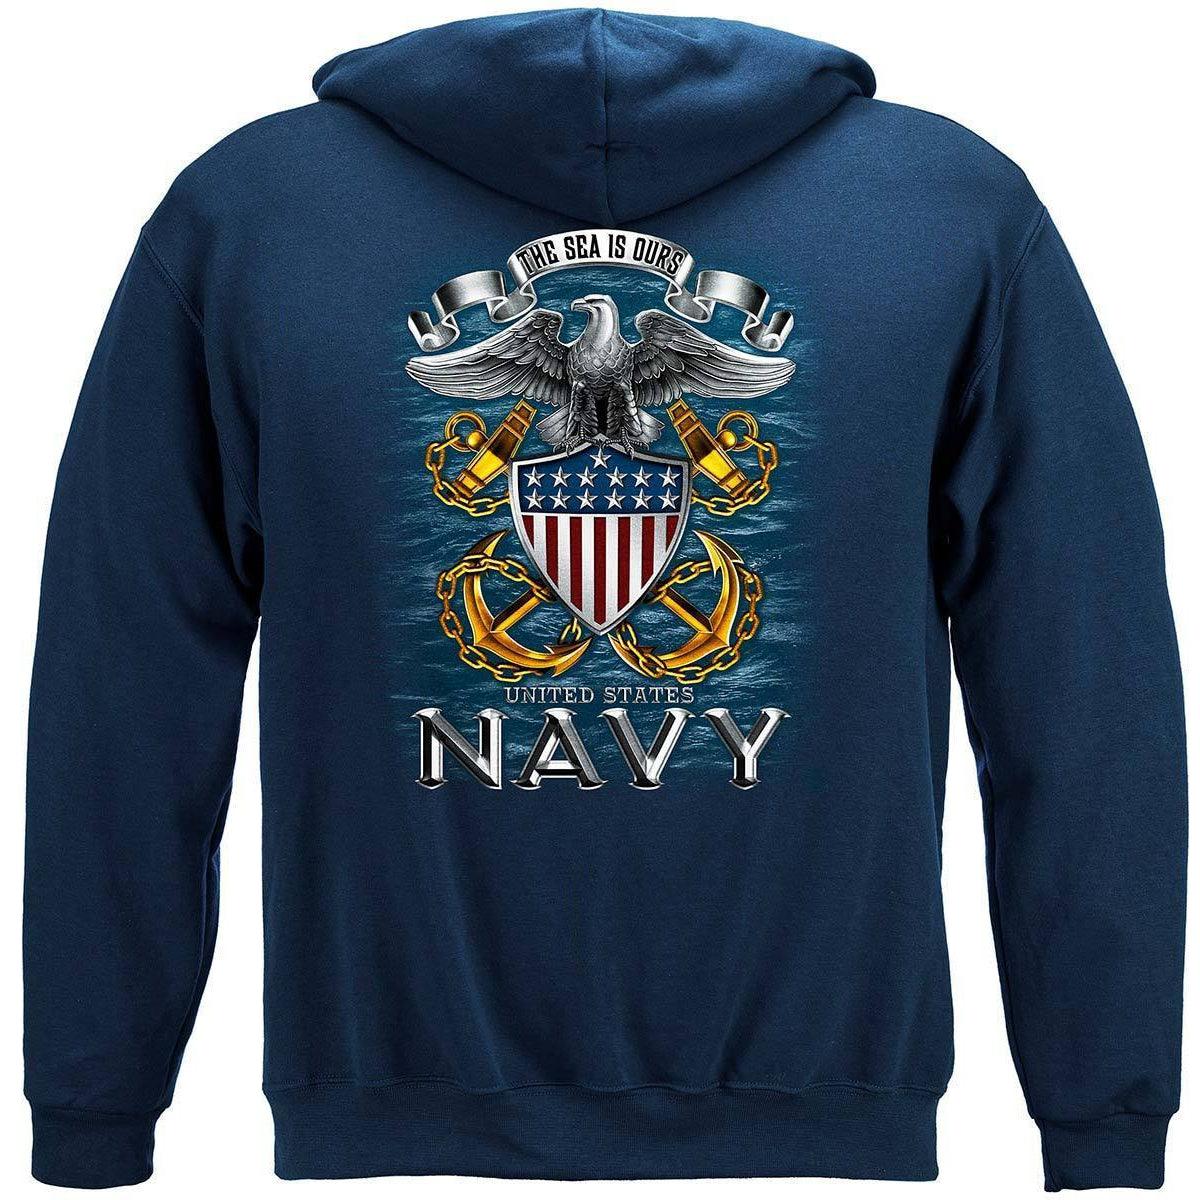 U.S. Navy The Seas is Ours T-Shirt - Military Republic